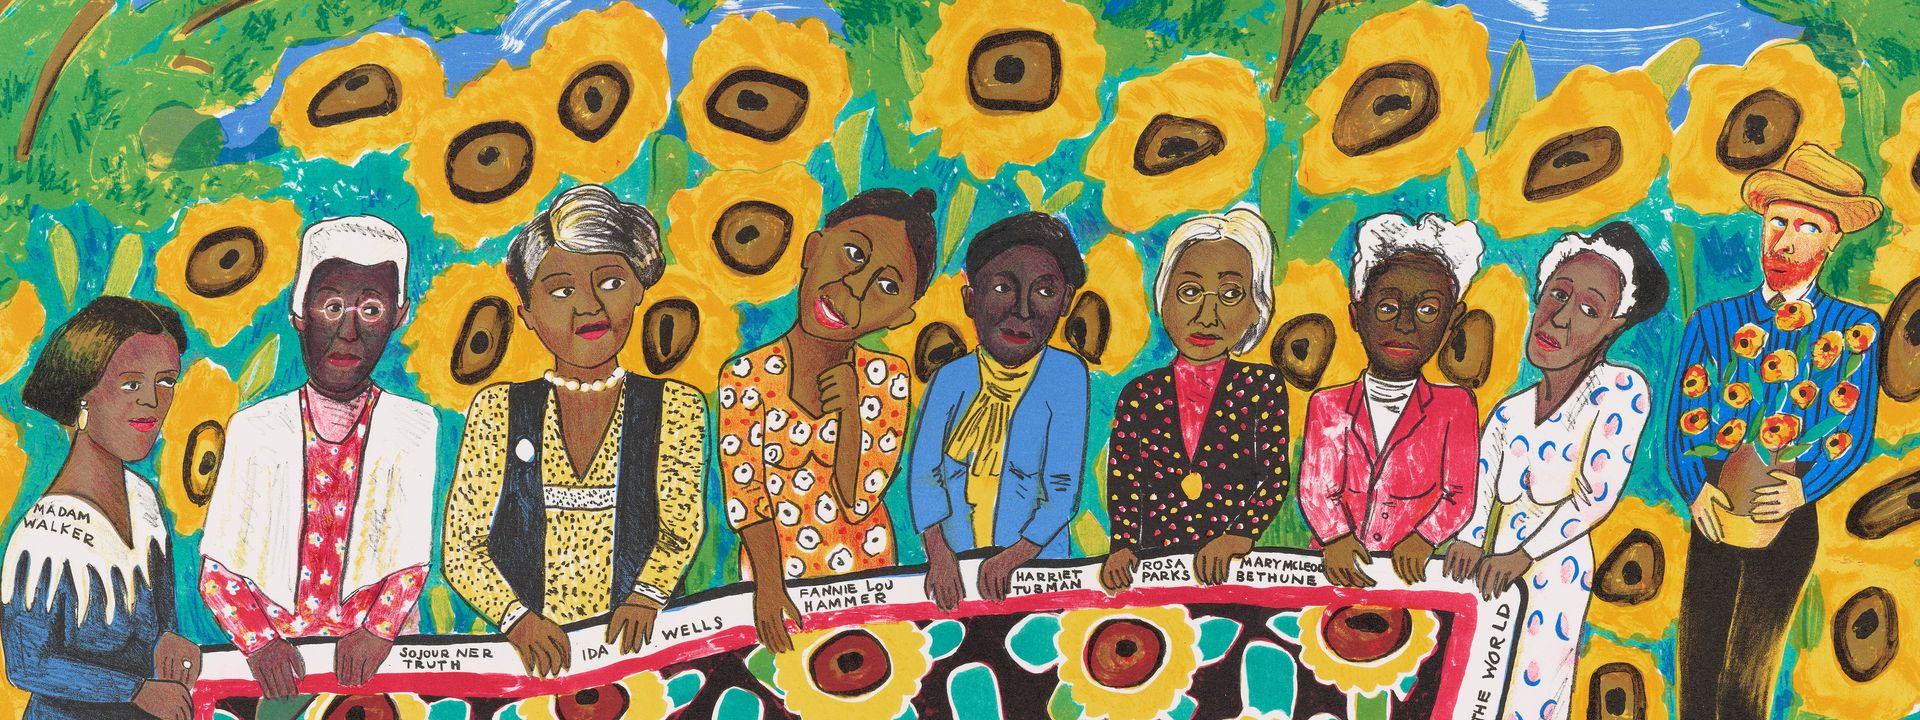 The Sunflower Quilting Bee at Arles, 1996, by Faith Ringgold